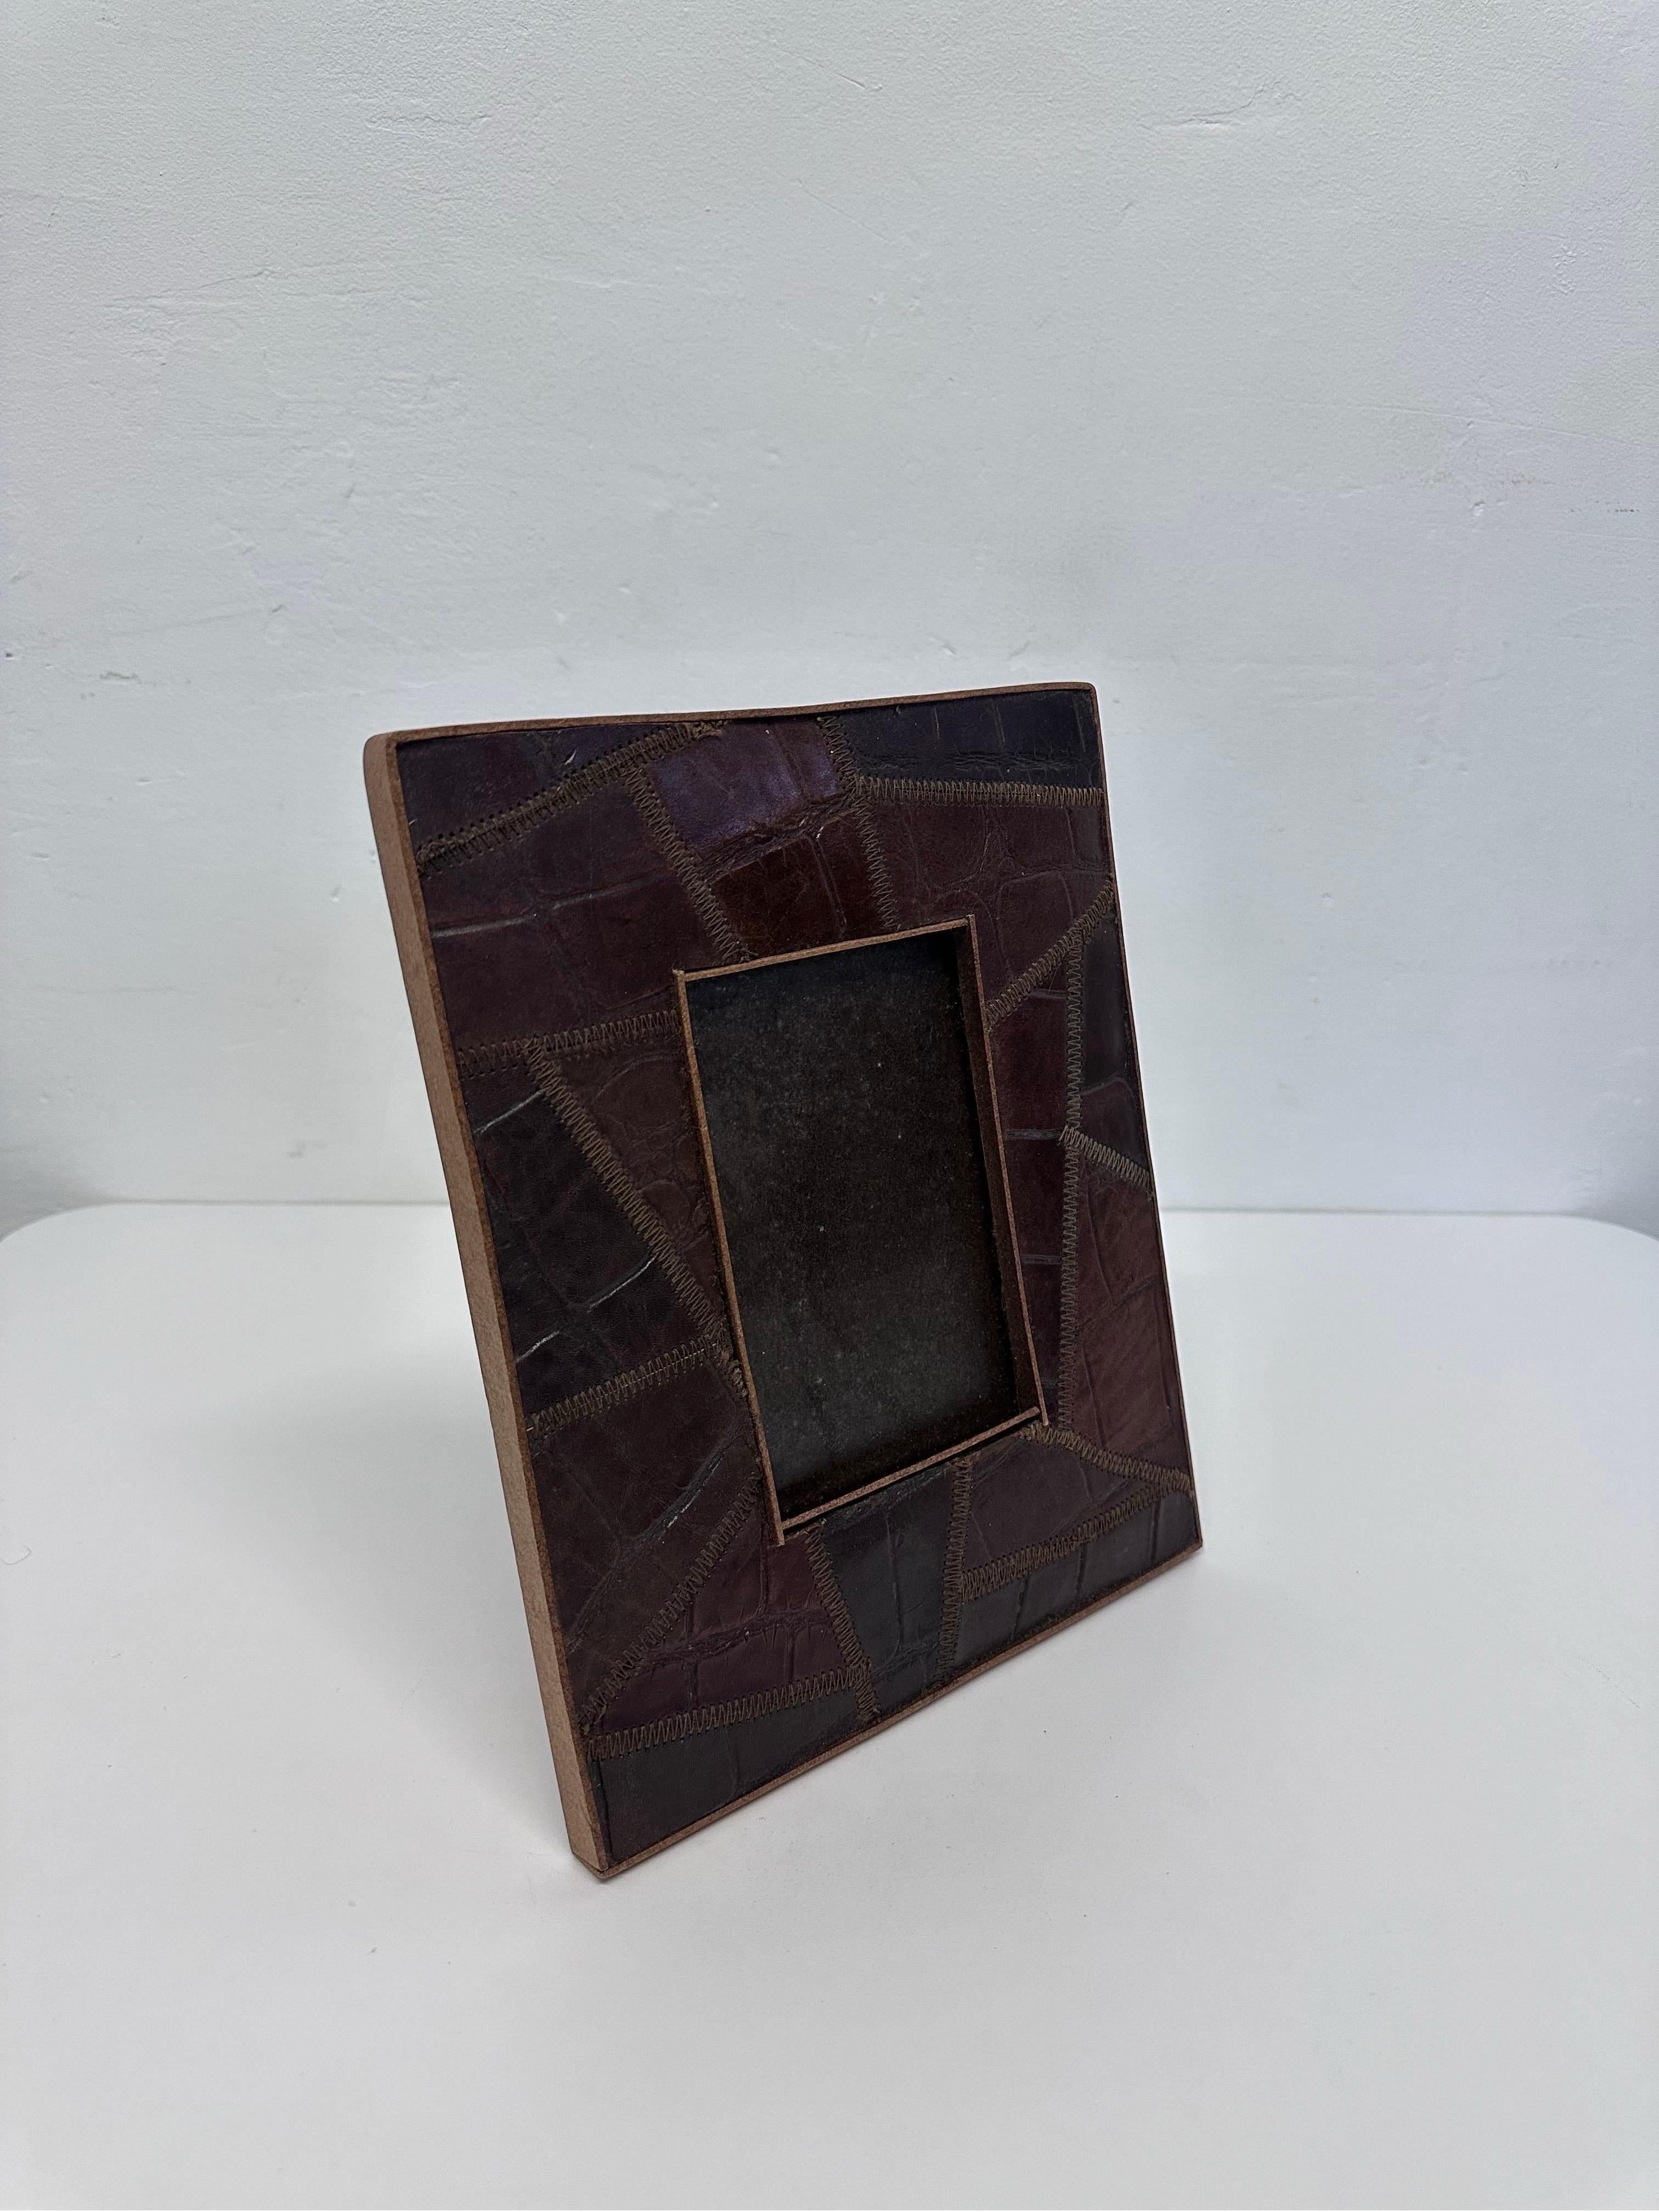 Photo frame covered in stitched alligator embossed leather by Palecek.

Viewable Photo Size: 3-1/2